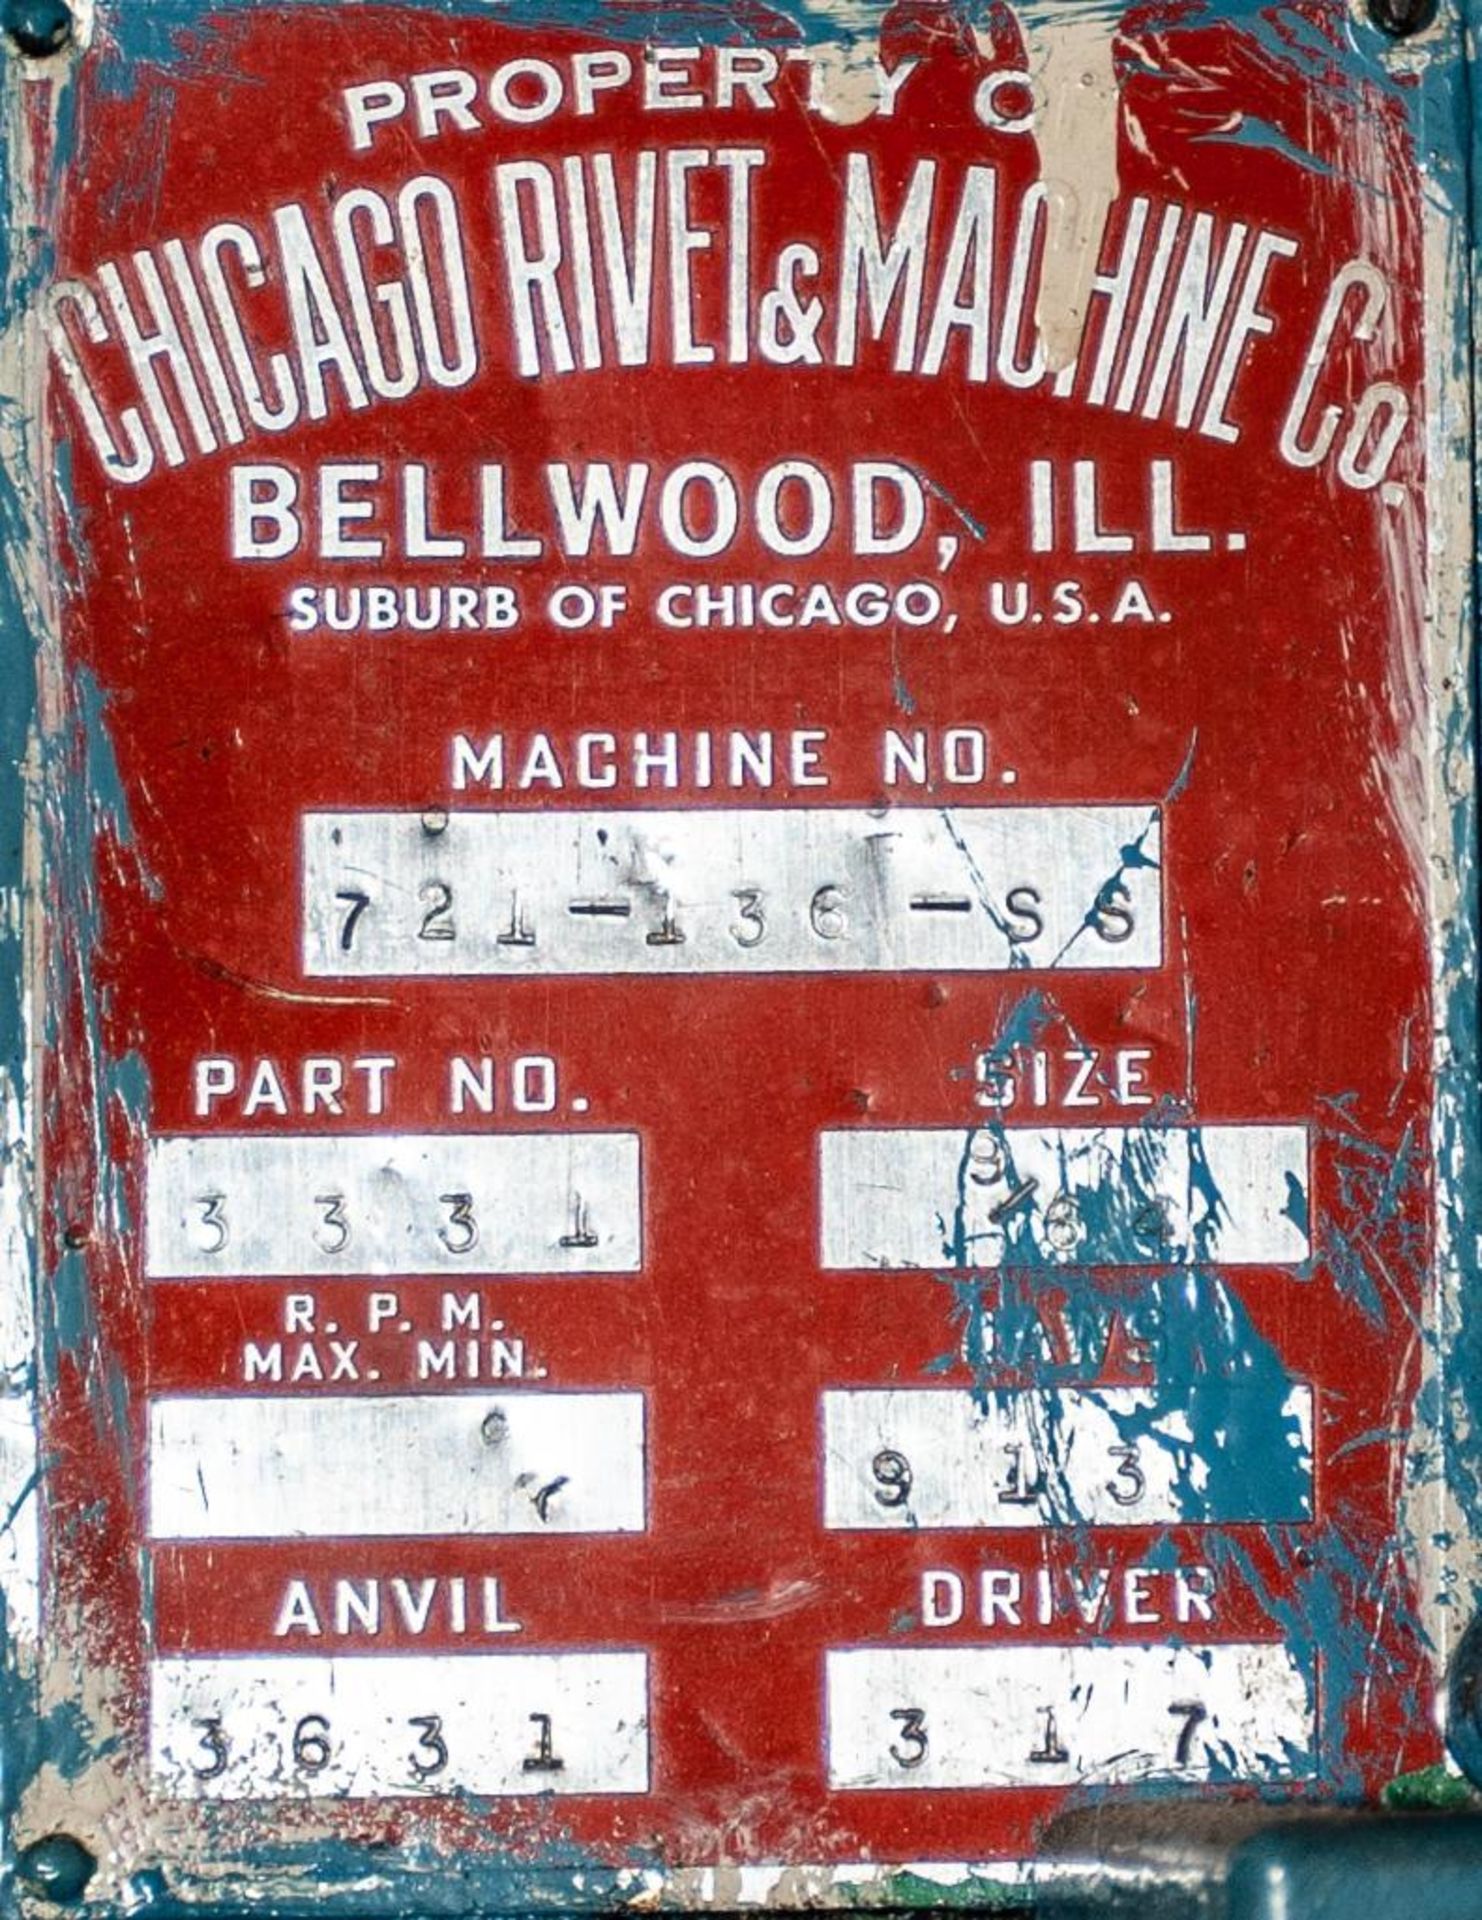 Chicago Rivet Machine Part # 3331, s/n 721-136 SS - Image 3 of 3